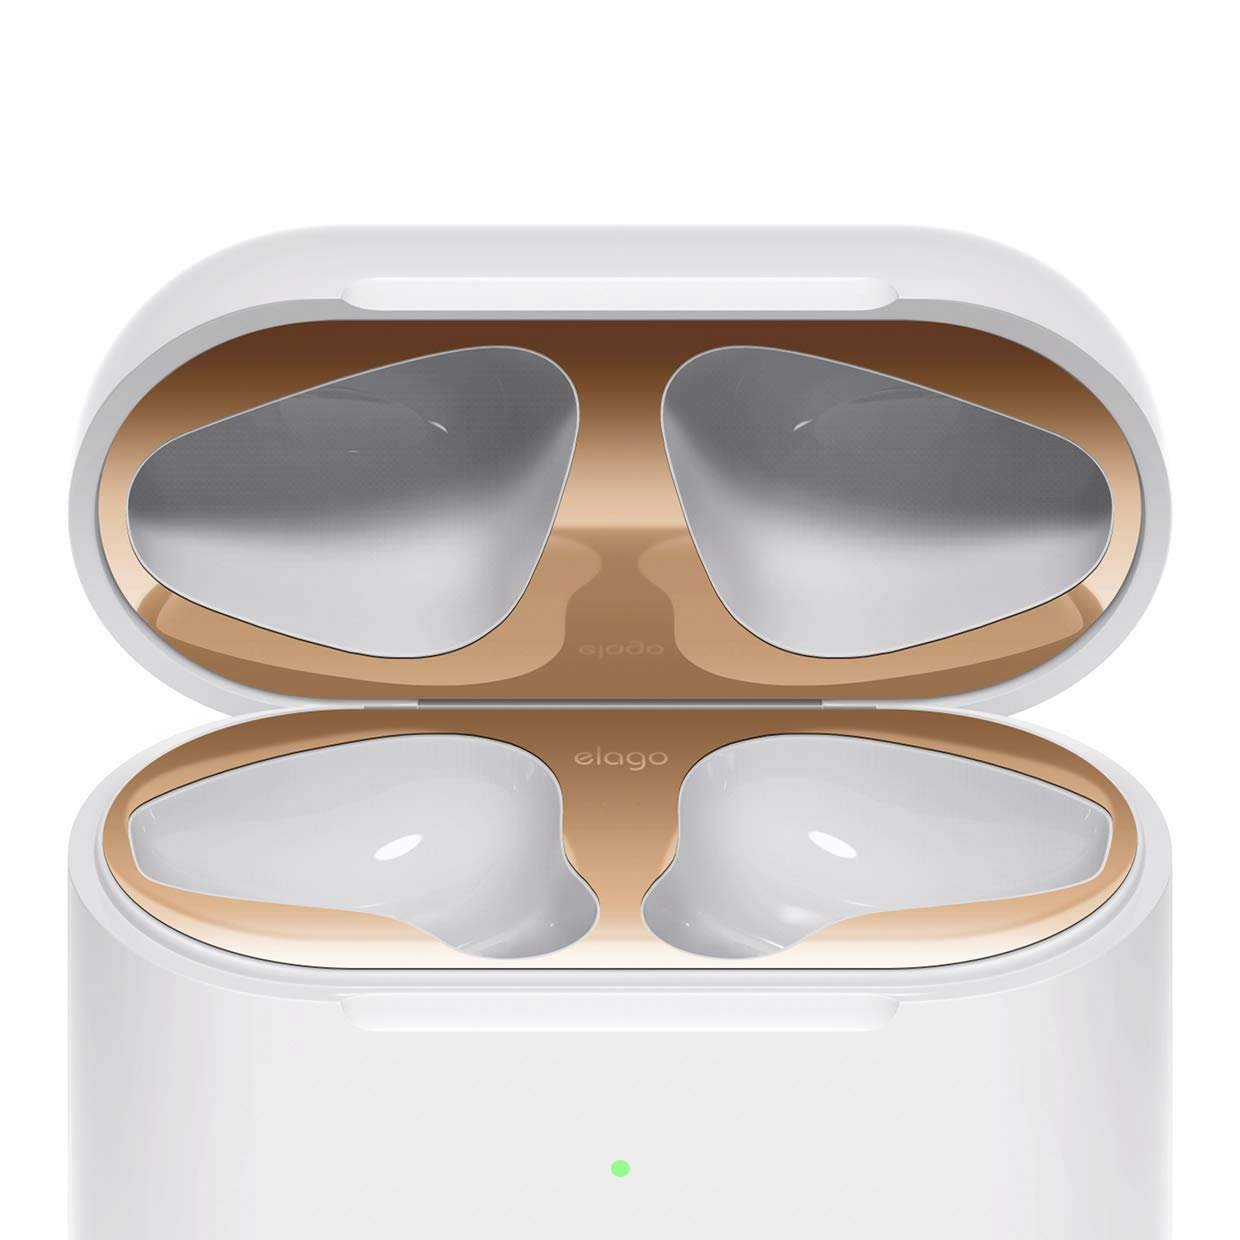 Book Cover elago AirPods 2 Dust Guard (Rose Gold, 1 Set) Dust-Proof Metal Cover, Luxurious Finish, Must Watch Installation Video - Compatible with Apple AirPods 2 Wireless Charging Case [US Patent Registered]